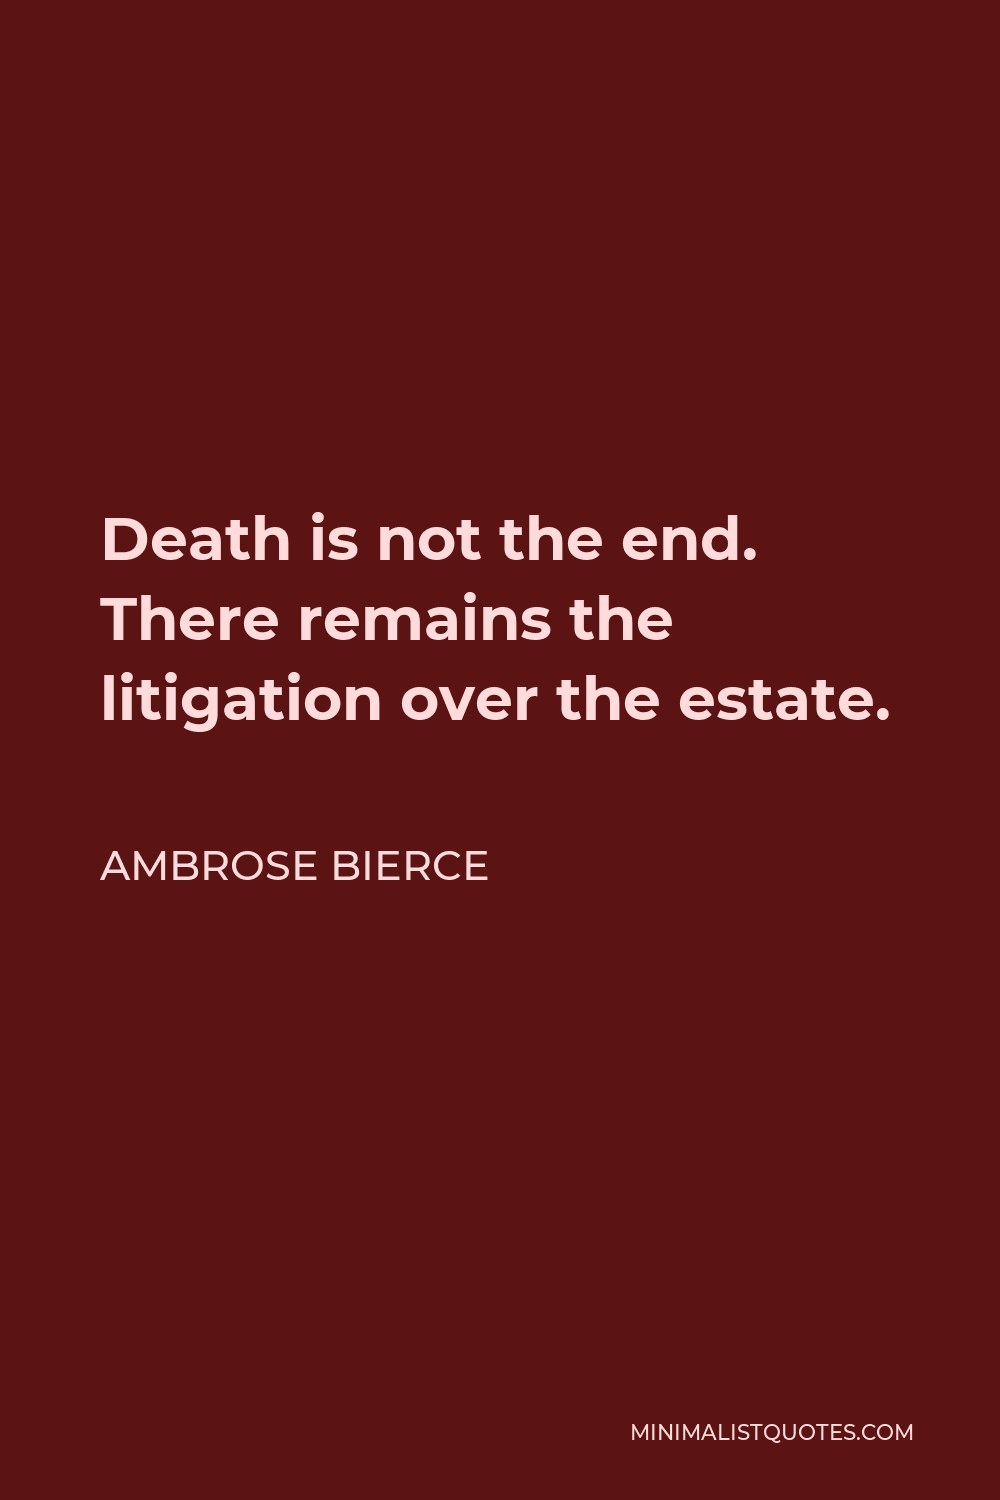 Ambrose Bierce Quote - Death is not the end. There remains the litigation over the estate.